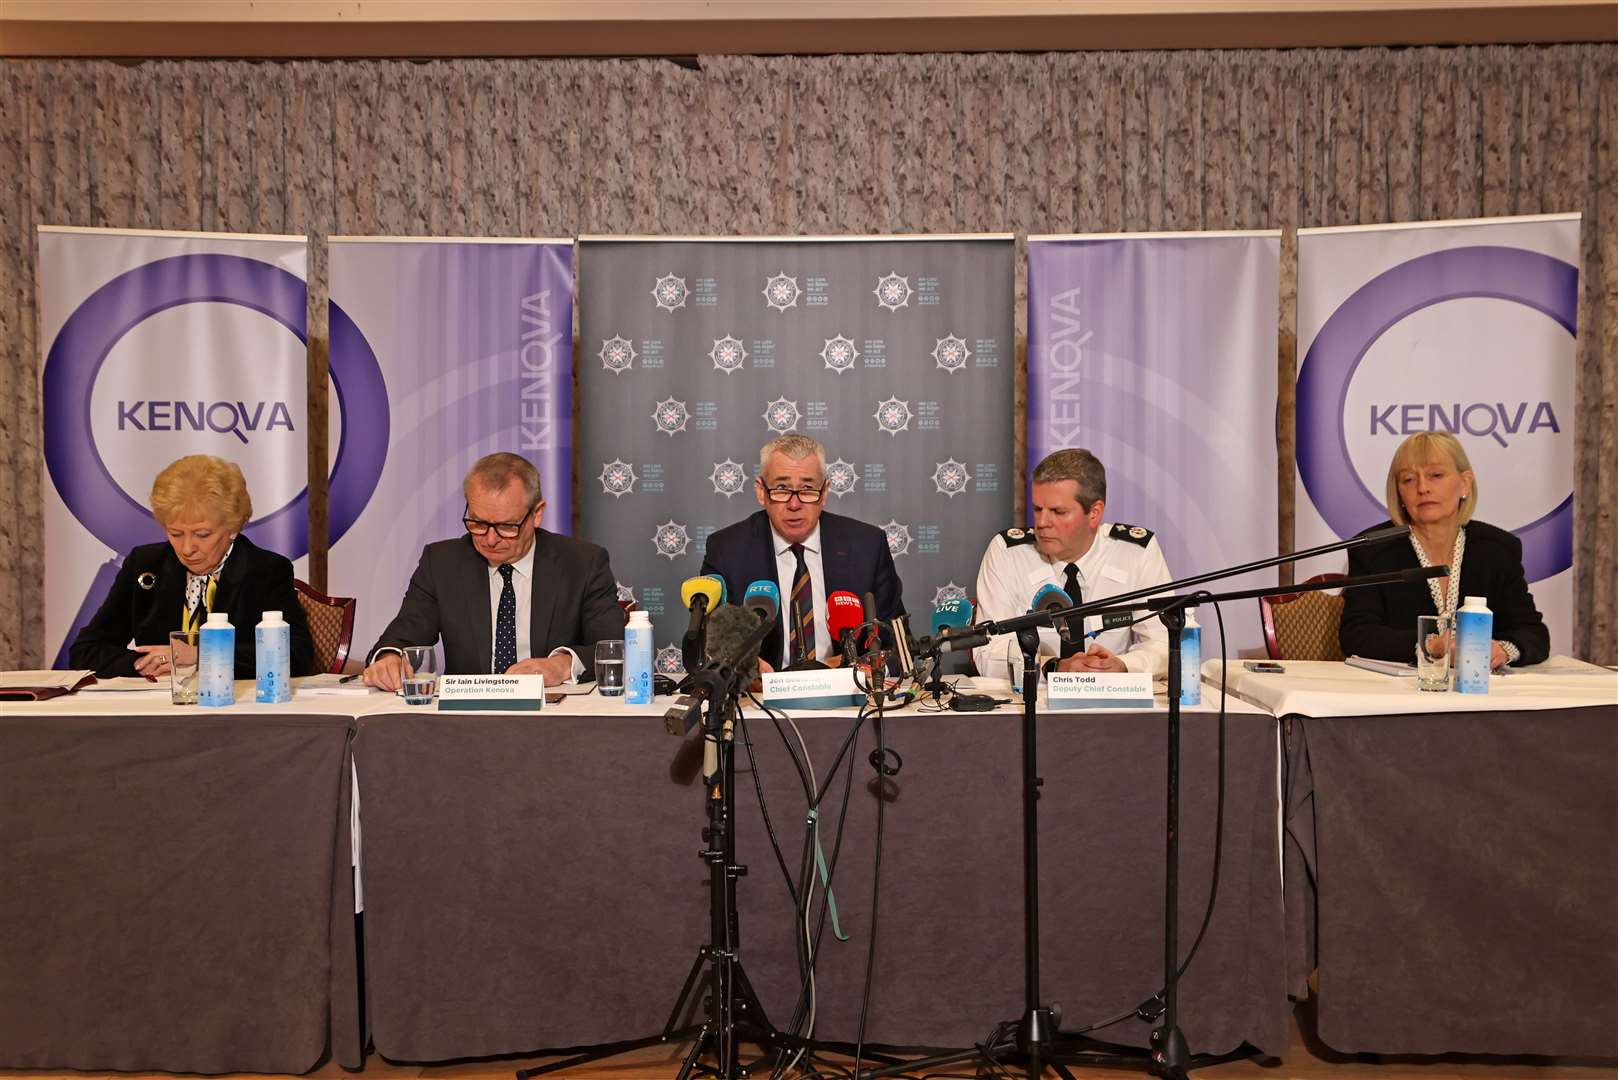 (left to right) Former police ombudsman for Northern Ireland, Baroness Nuala O’Loan, Officer in charge Operation Kenova, Sir Iain Livingstone, Chief Constable Jon Boutcher, Temporary Deputy Chief Constable Chris Todd, and former victims commissioner Judith Thompson (Liam McBurney/PA)